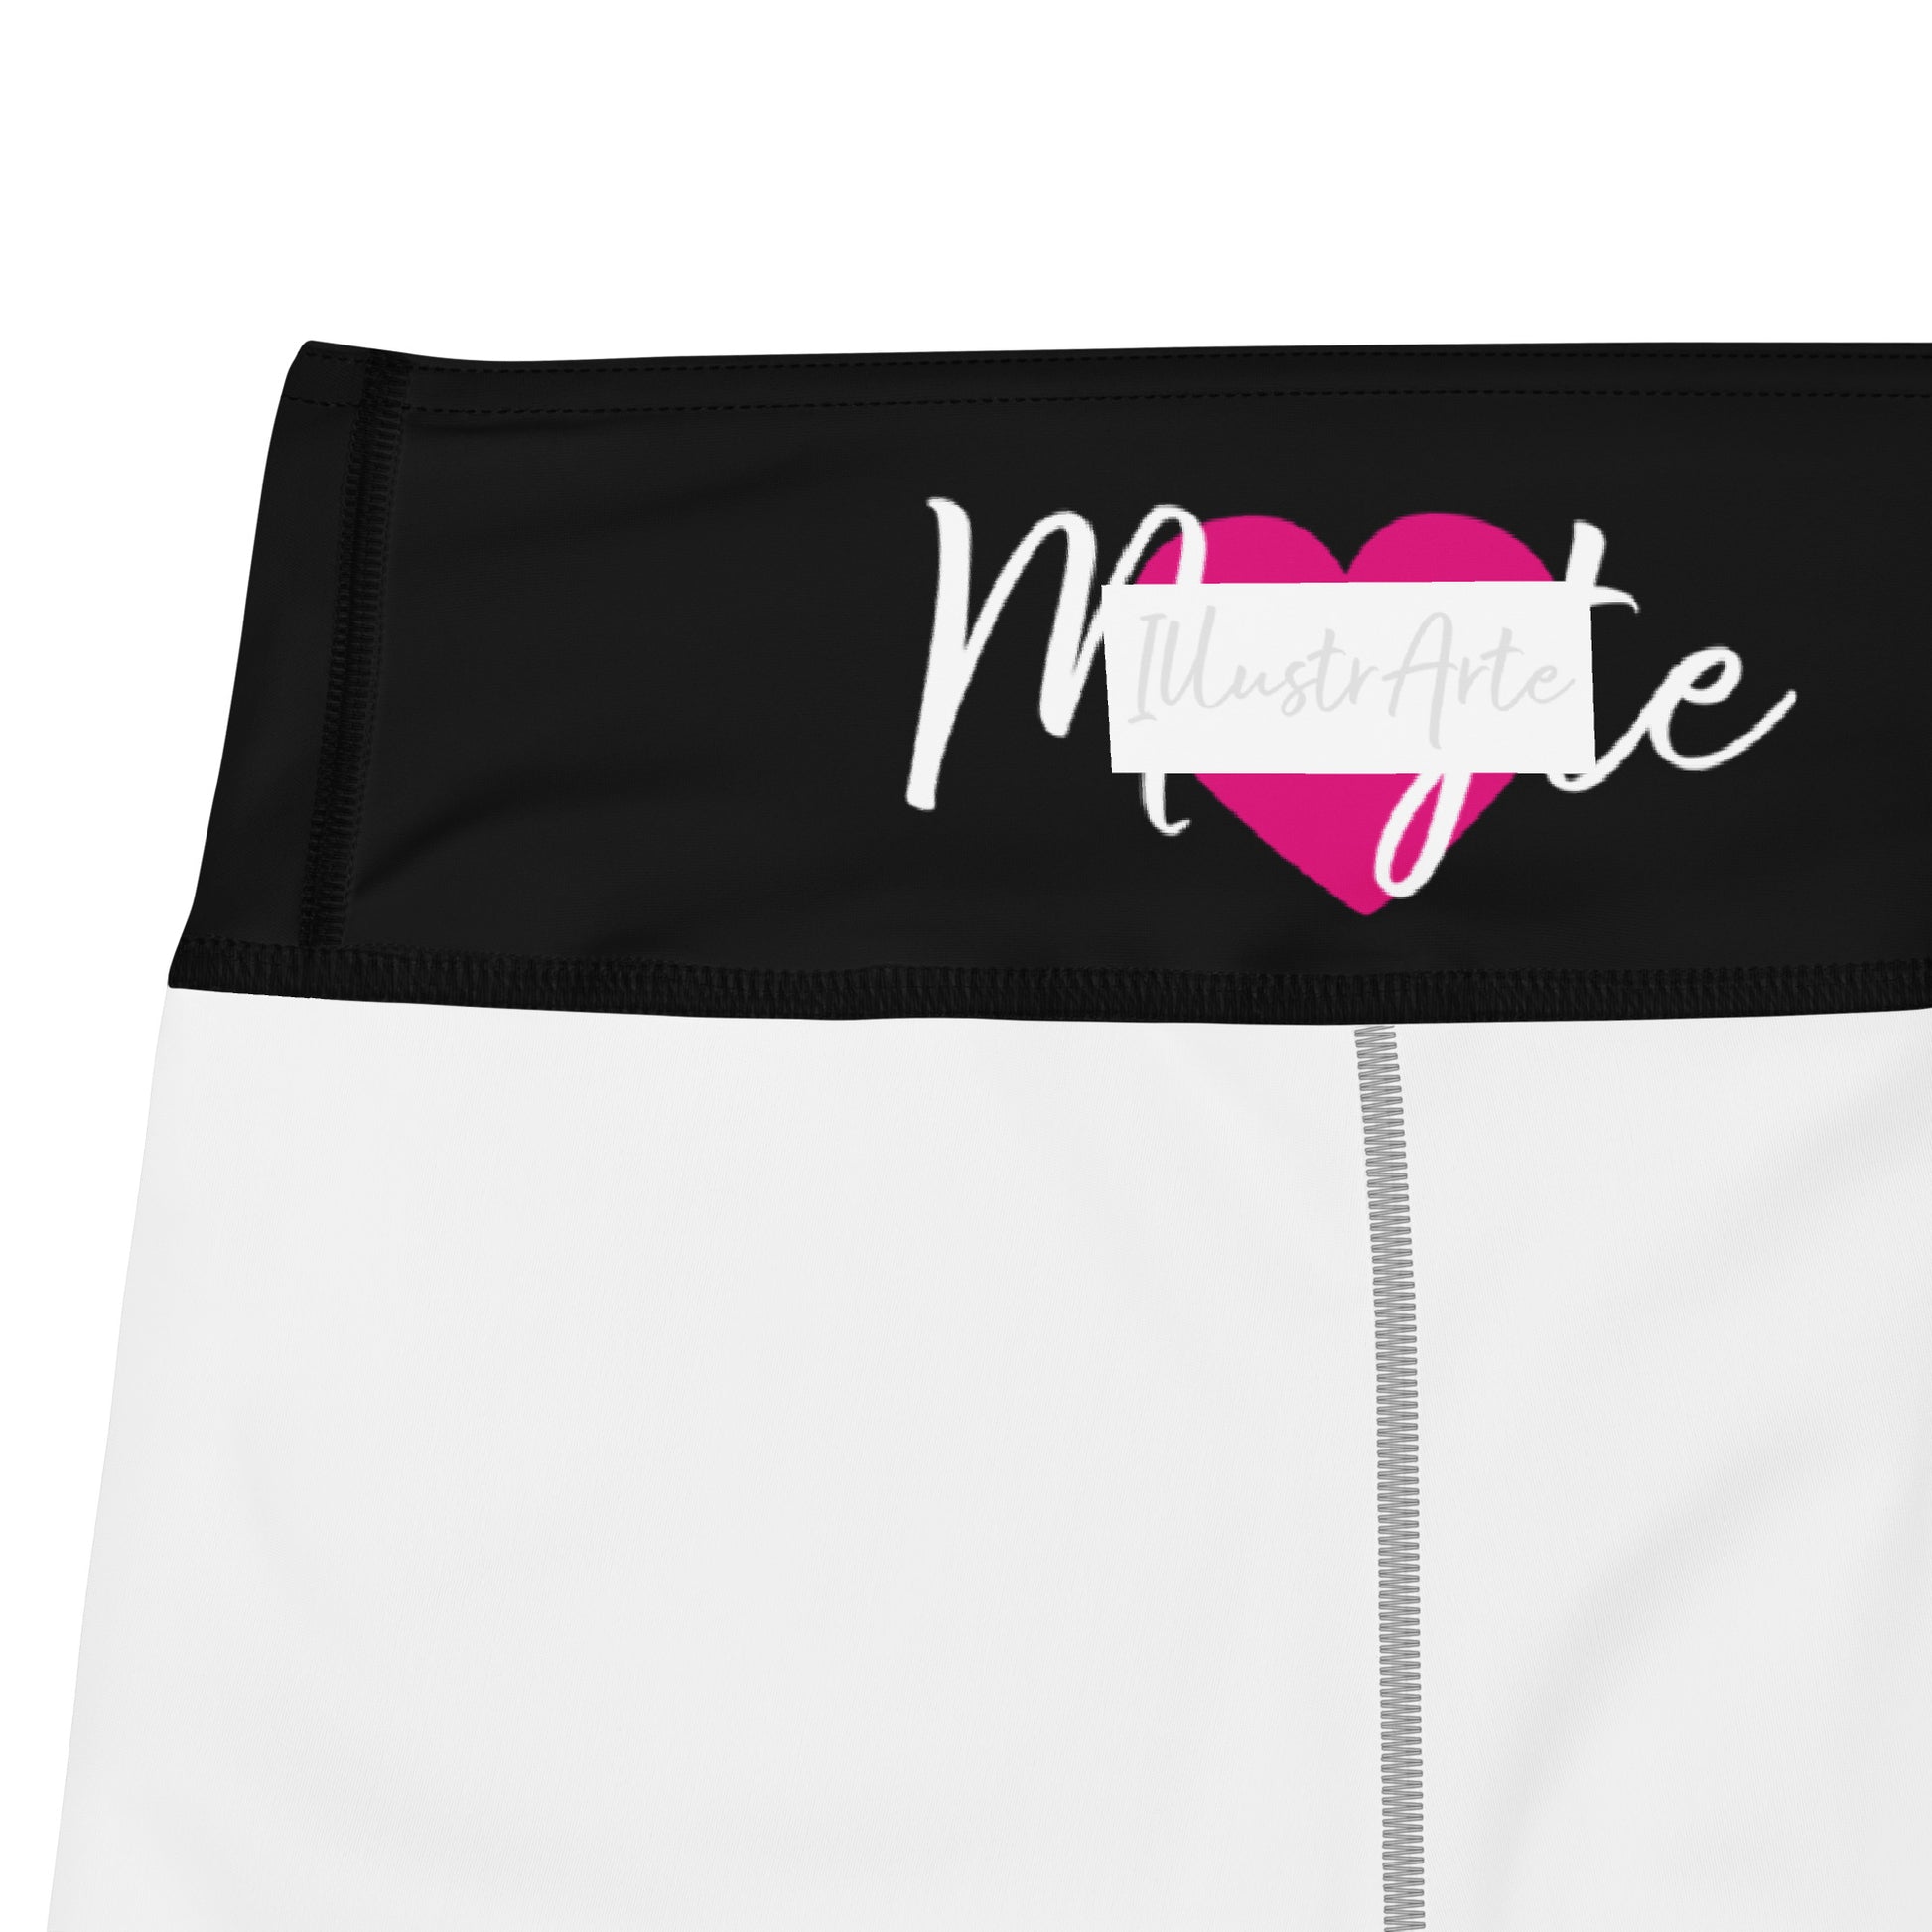 a white and black skirt with a pink heart